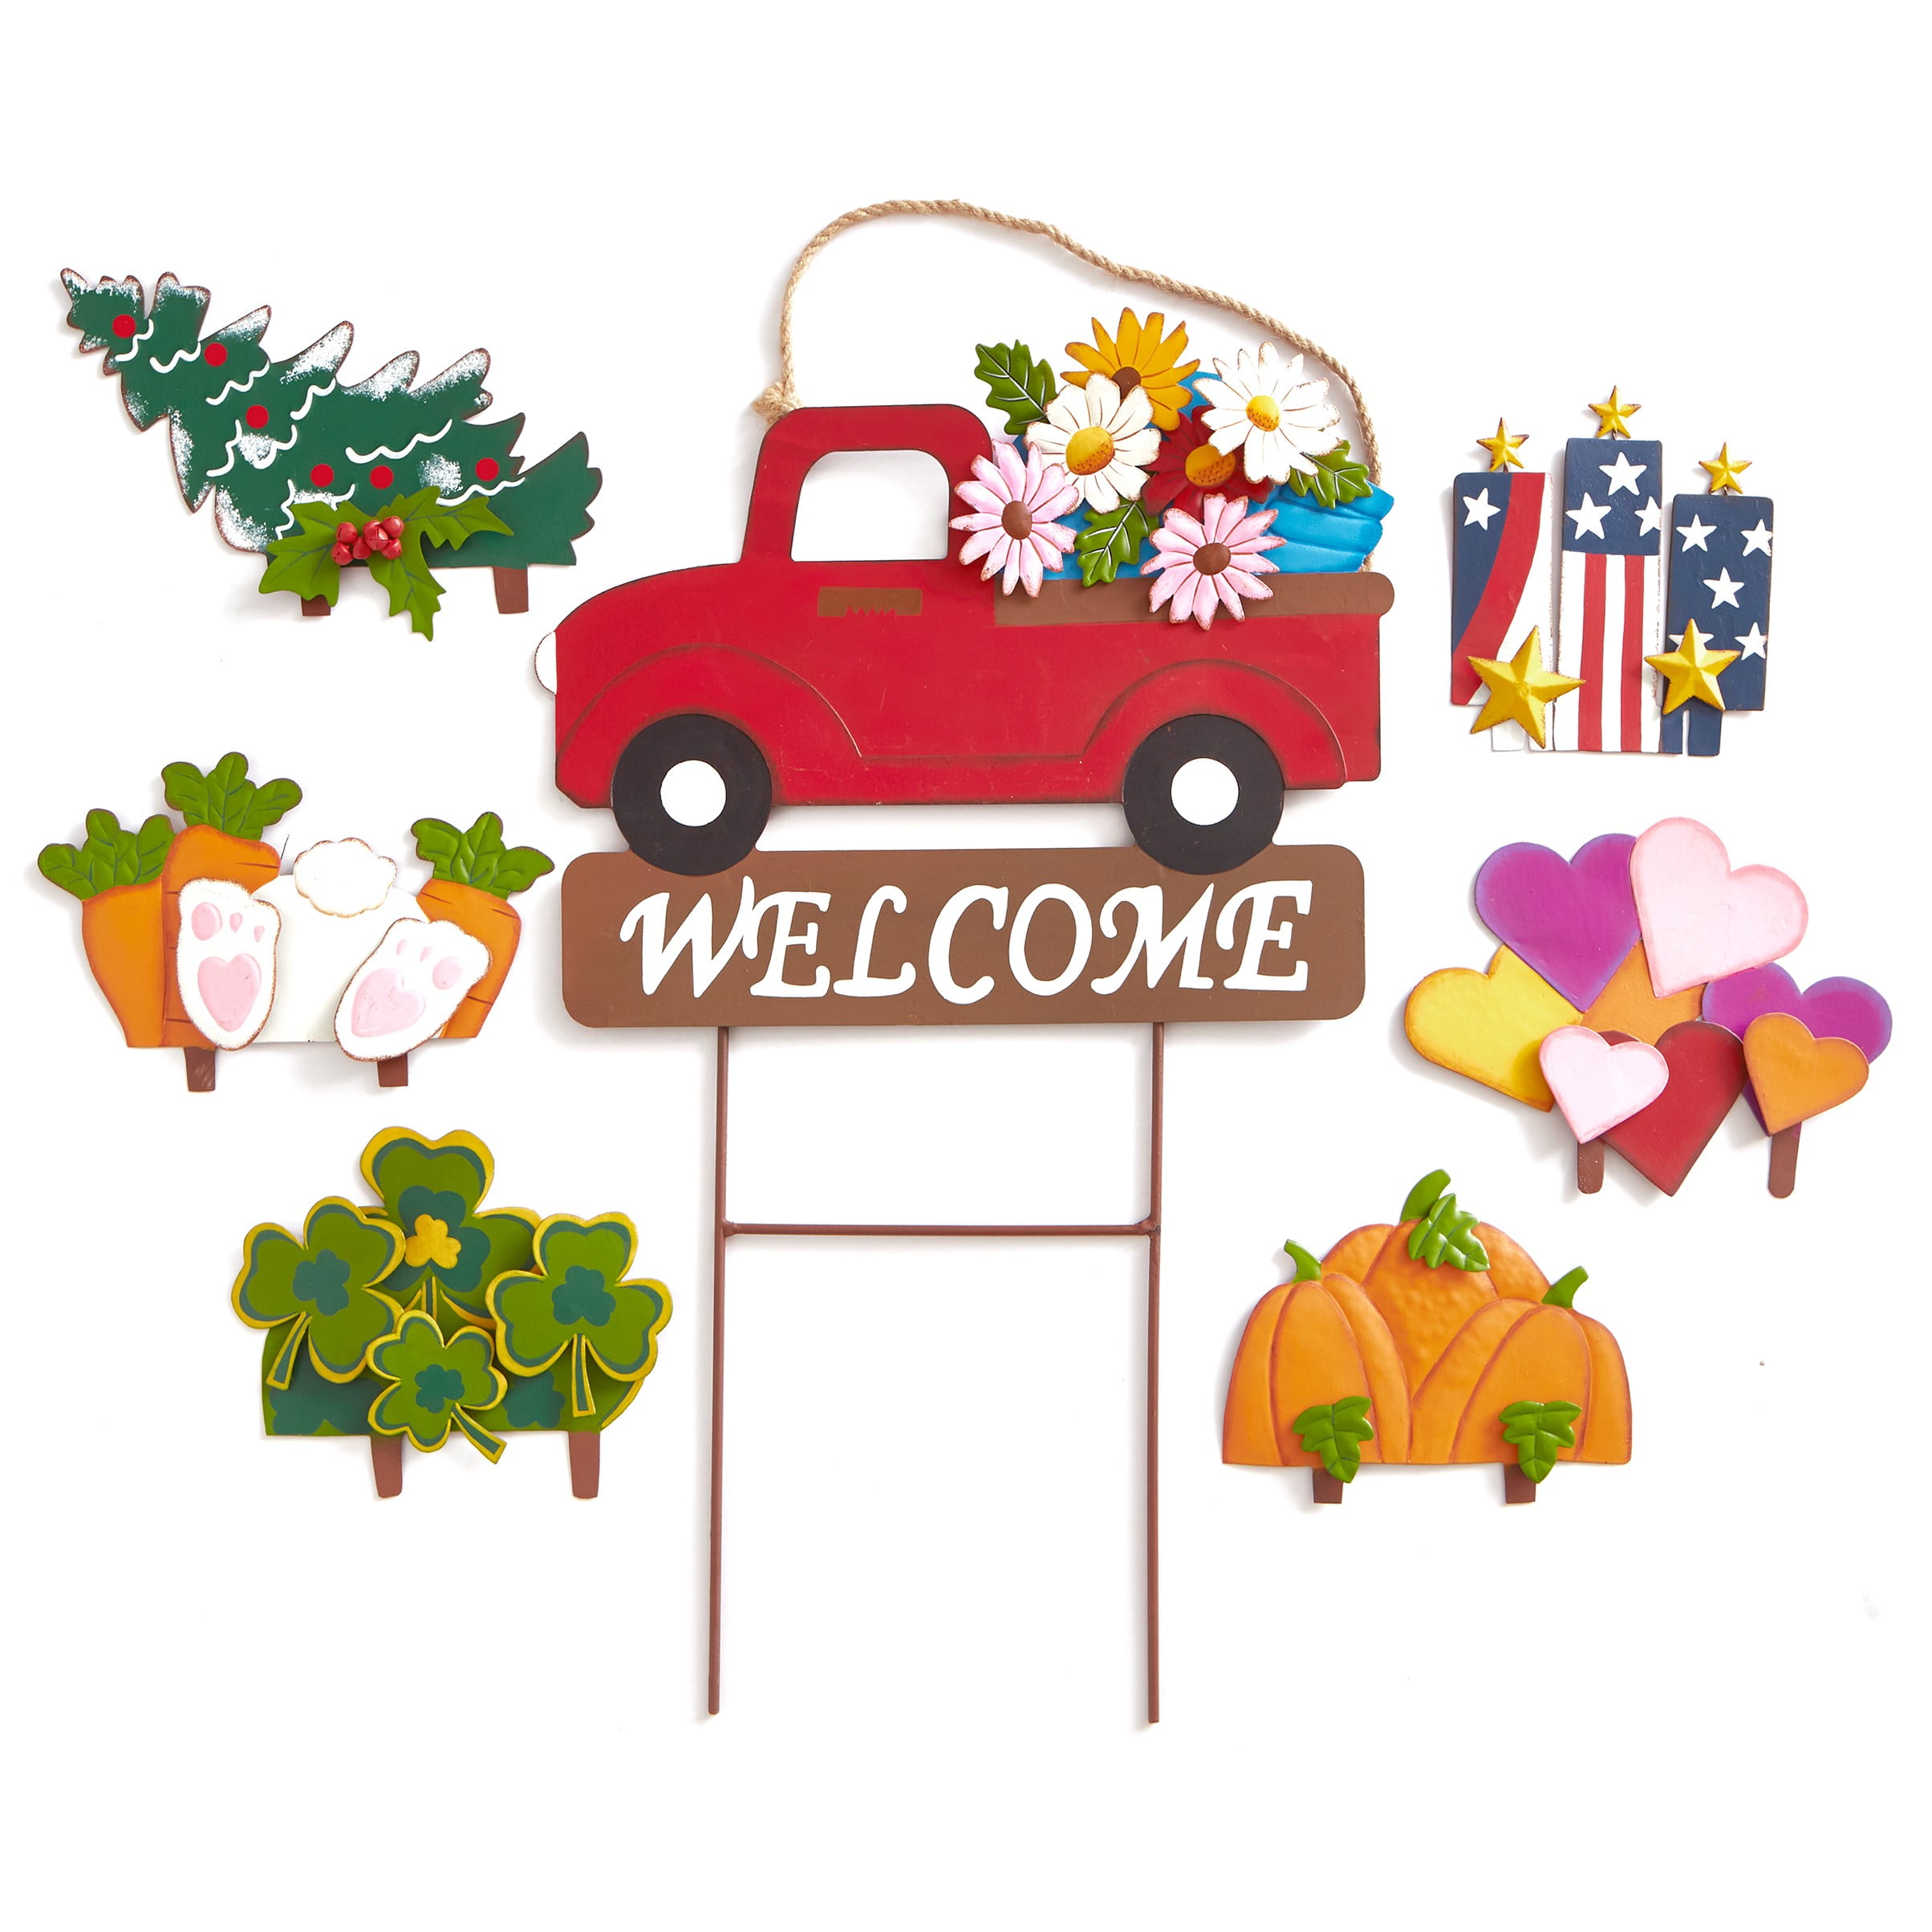 Winder Red Truck Decor Home Welcome Sign 2-Side Wood Block Seasonal Cutout Set Tabletop with Interchangeable 16-PC Icons for Spring 4th of July Halloween Christmas for Farmhouse Fireplace Mantel Decor